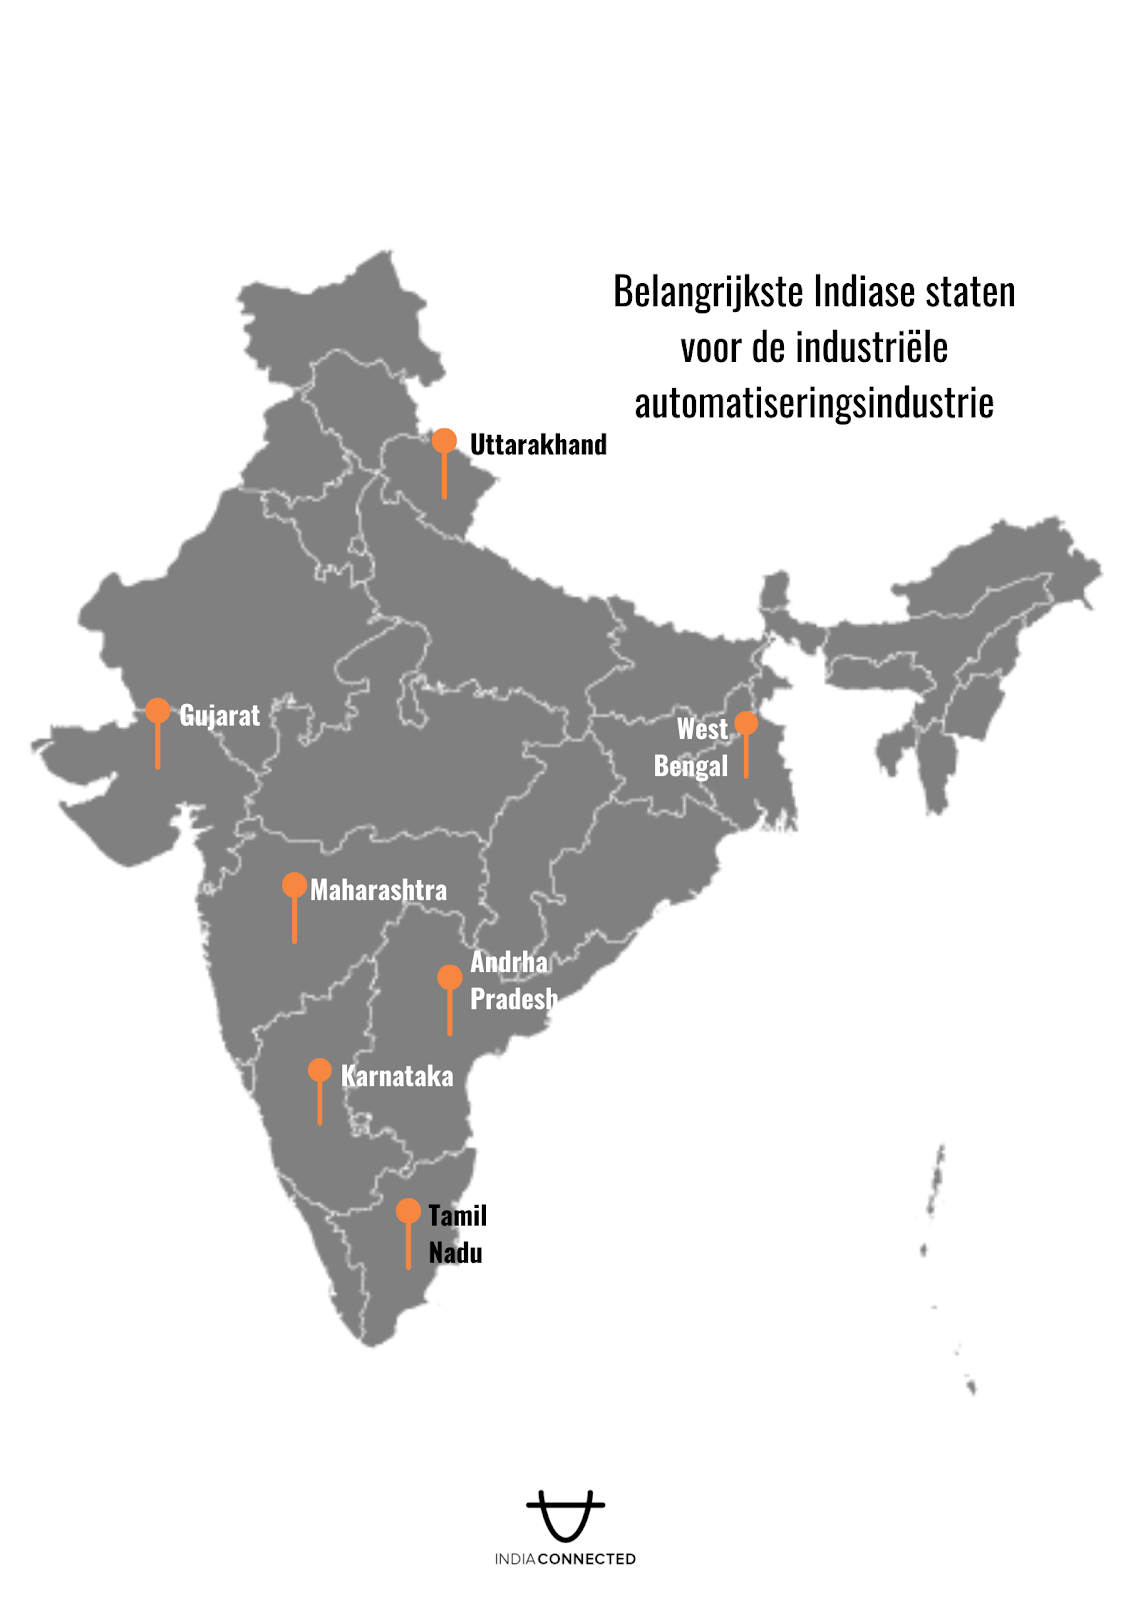 industrial automation map in india